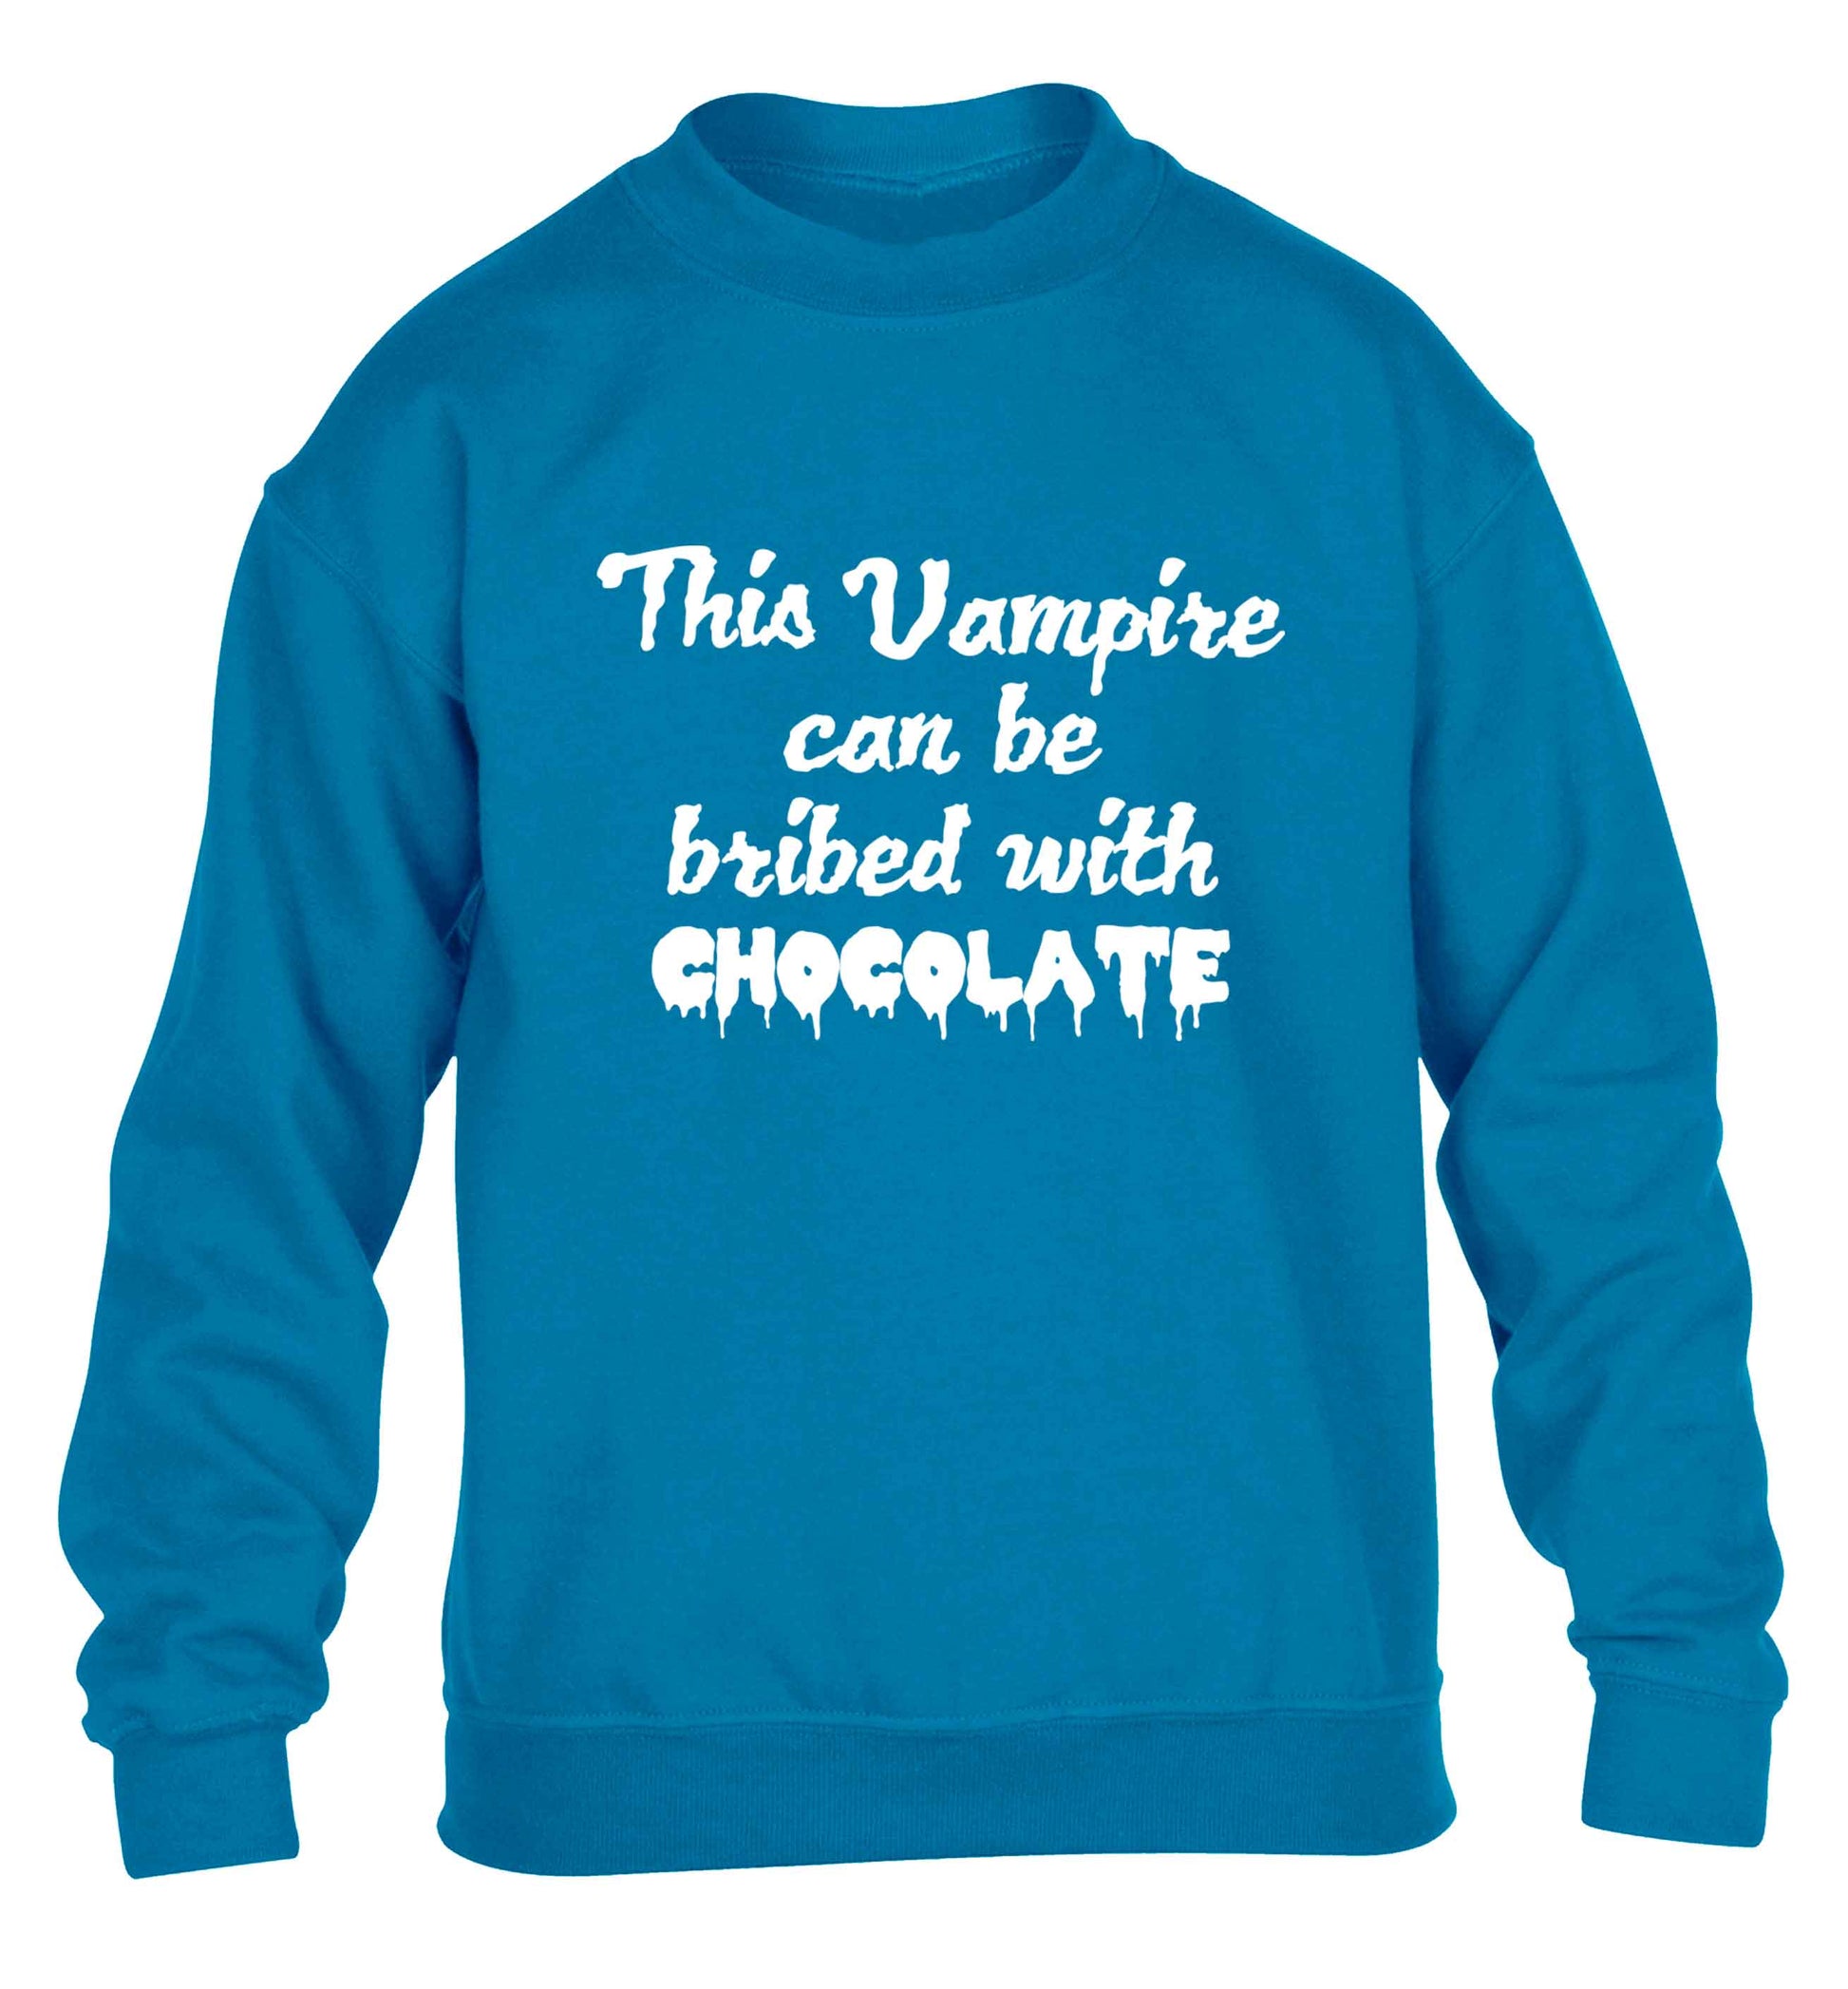 This vampire can be bribed with chocolate children's blue sweater 12-13 Years